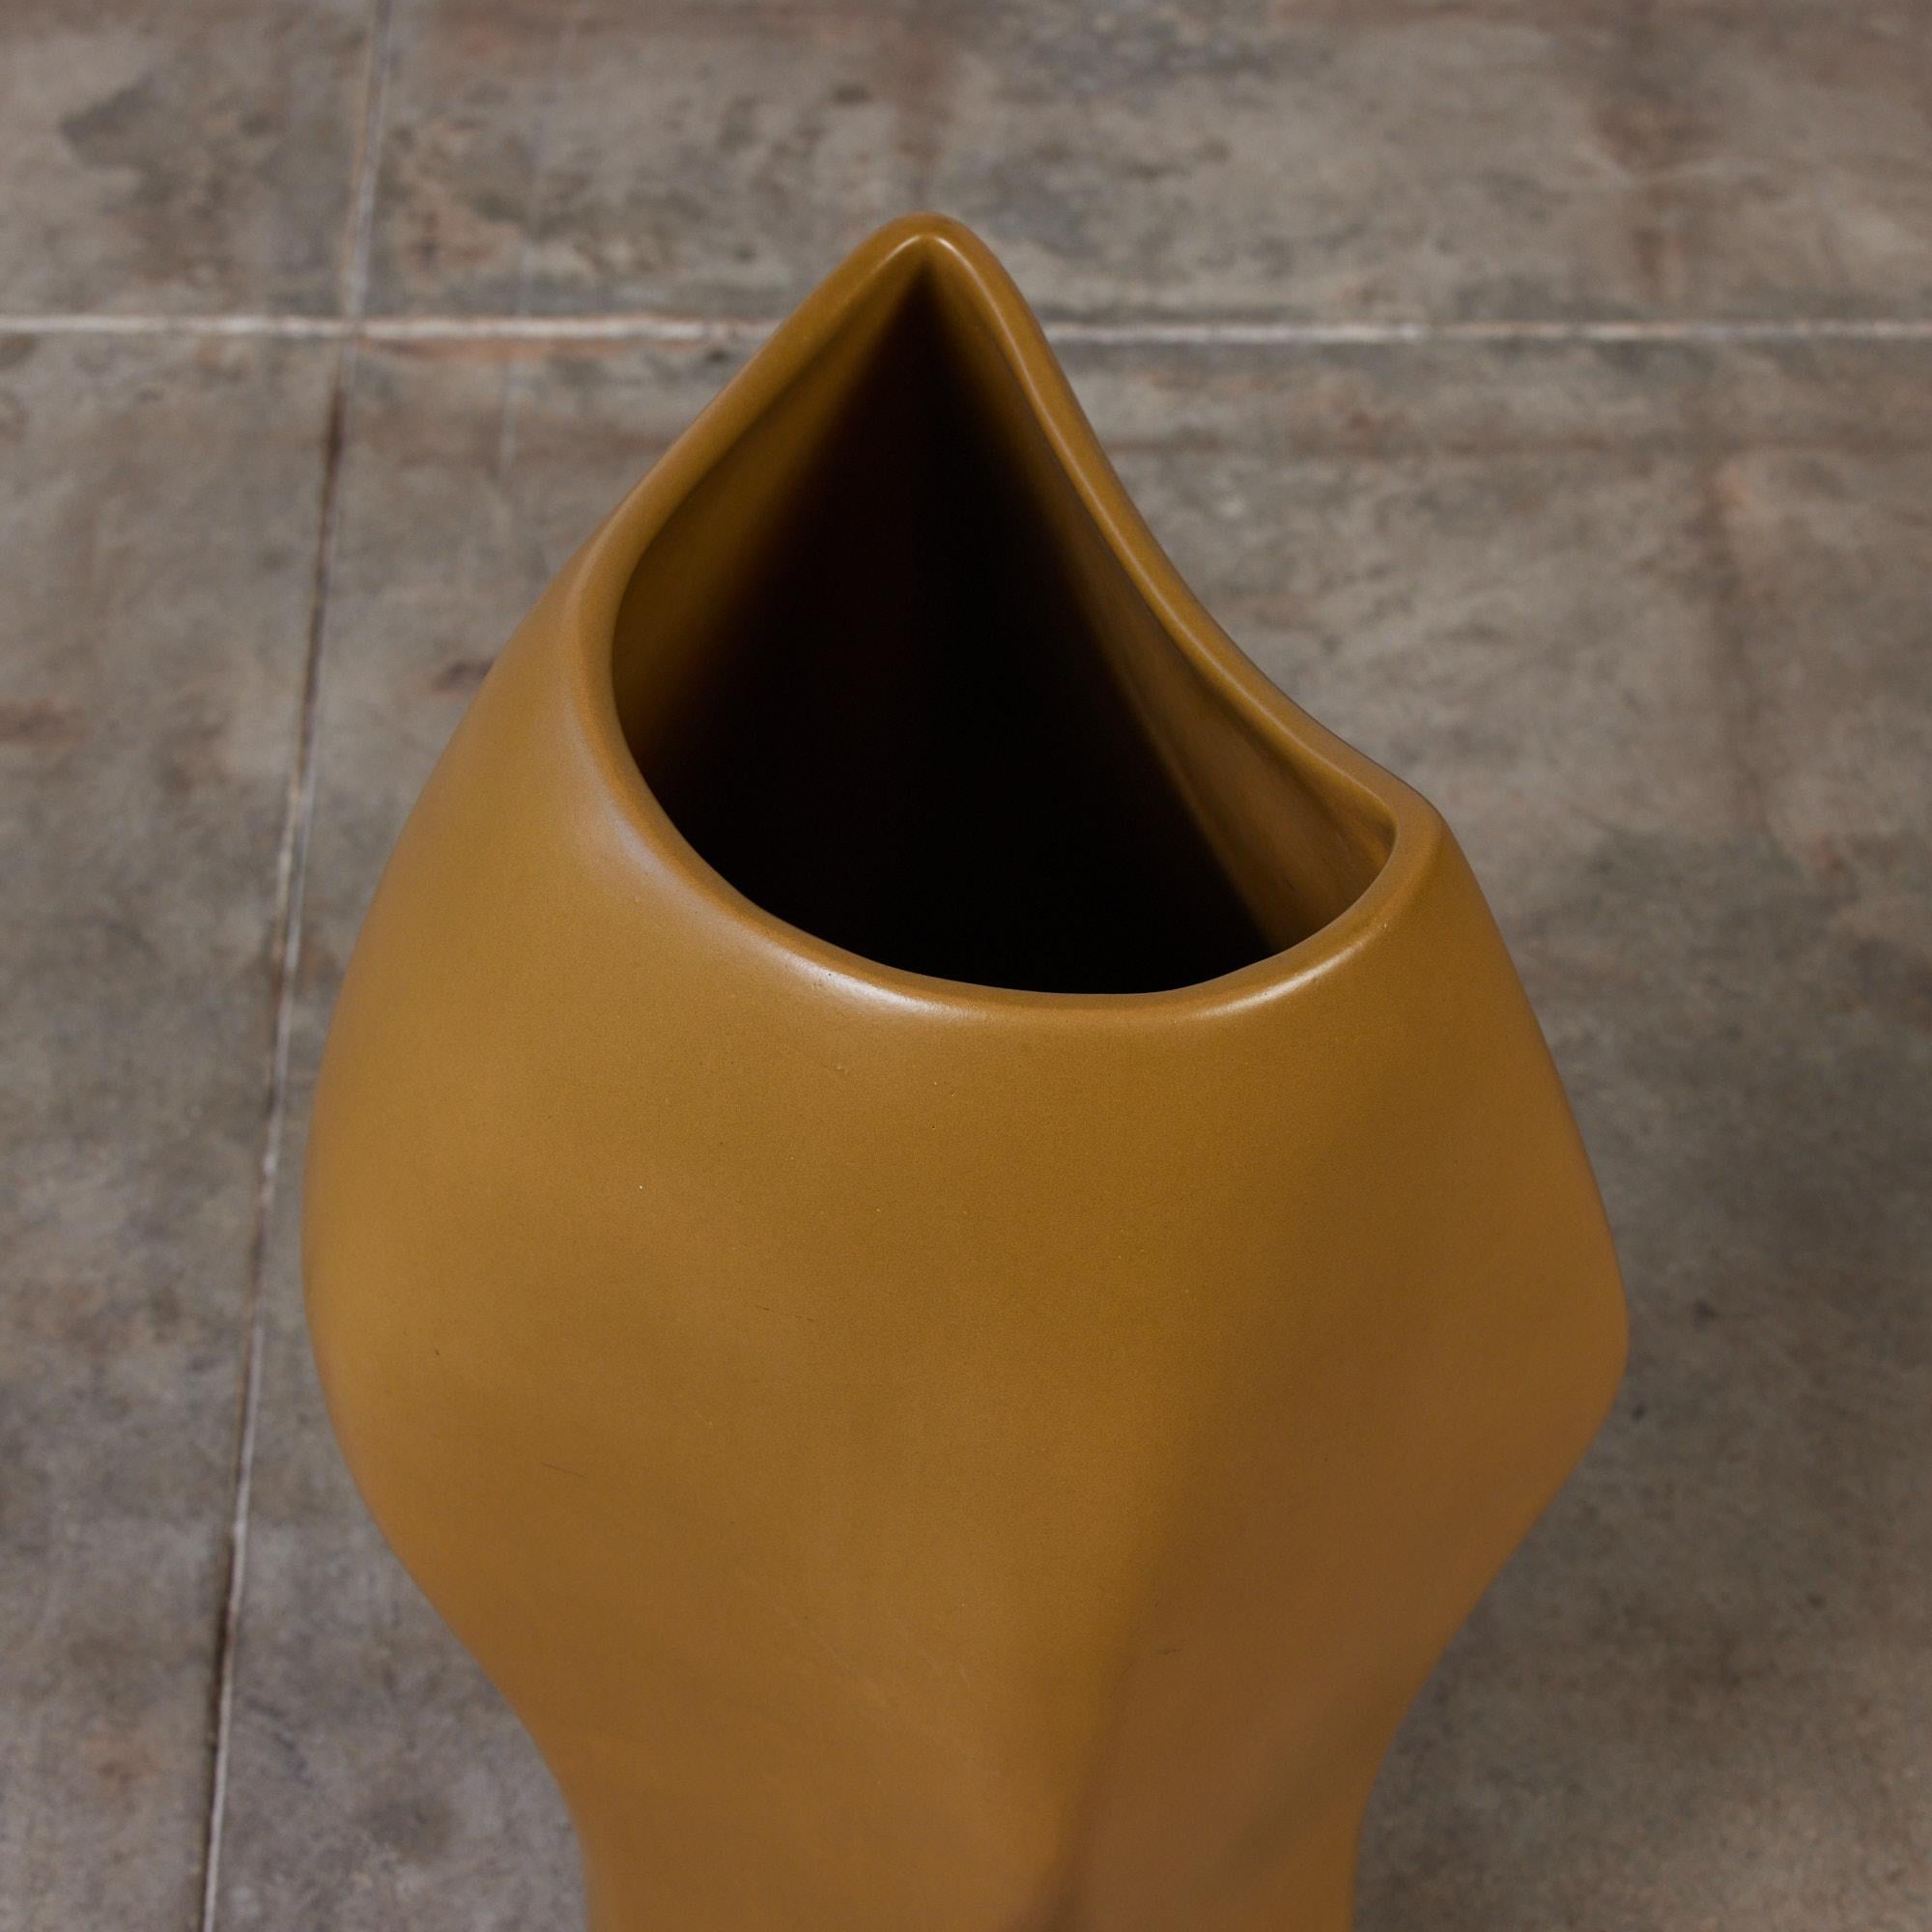 David Cressey Sculptural Planter for Architectural Pottery 1